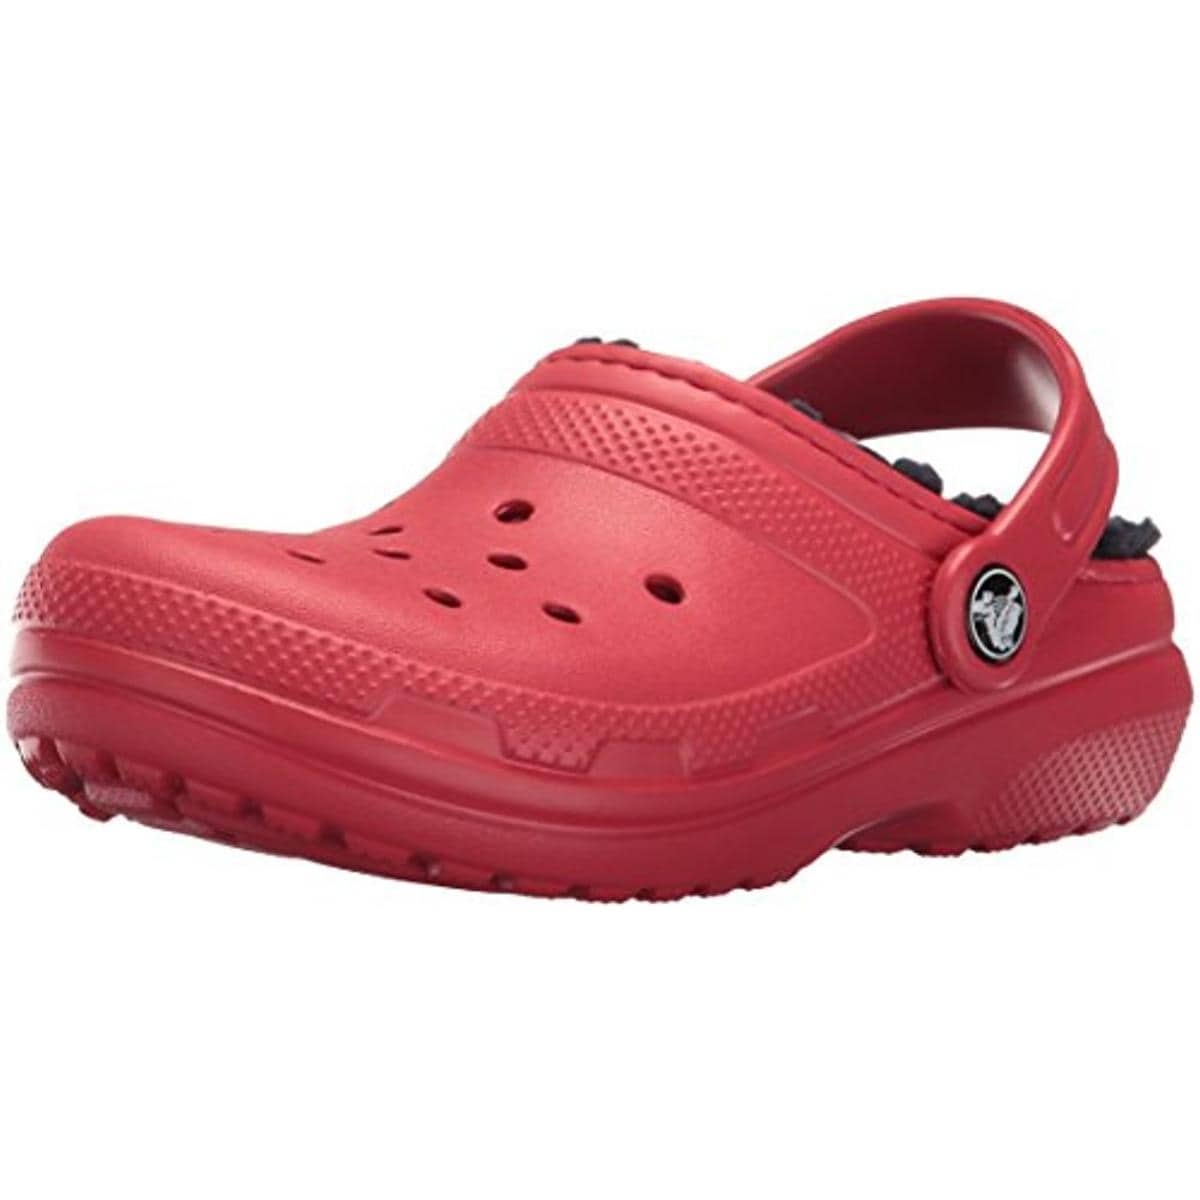 crocs with fur red